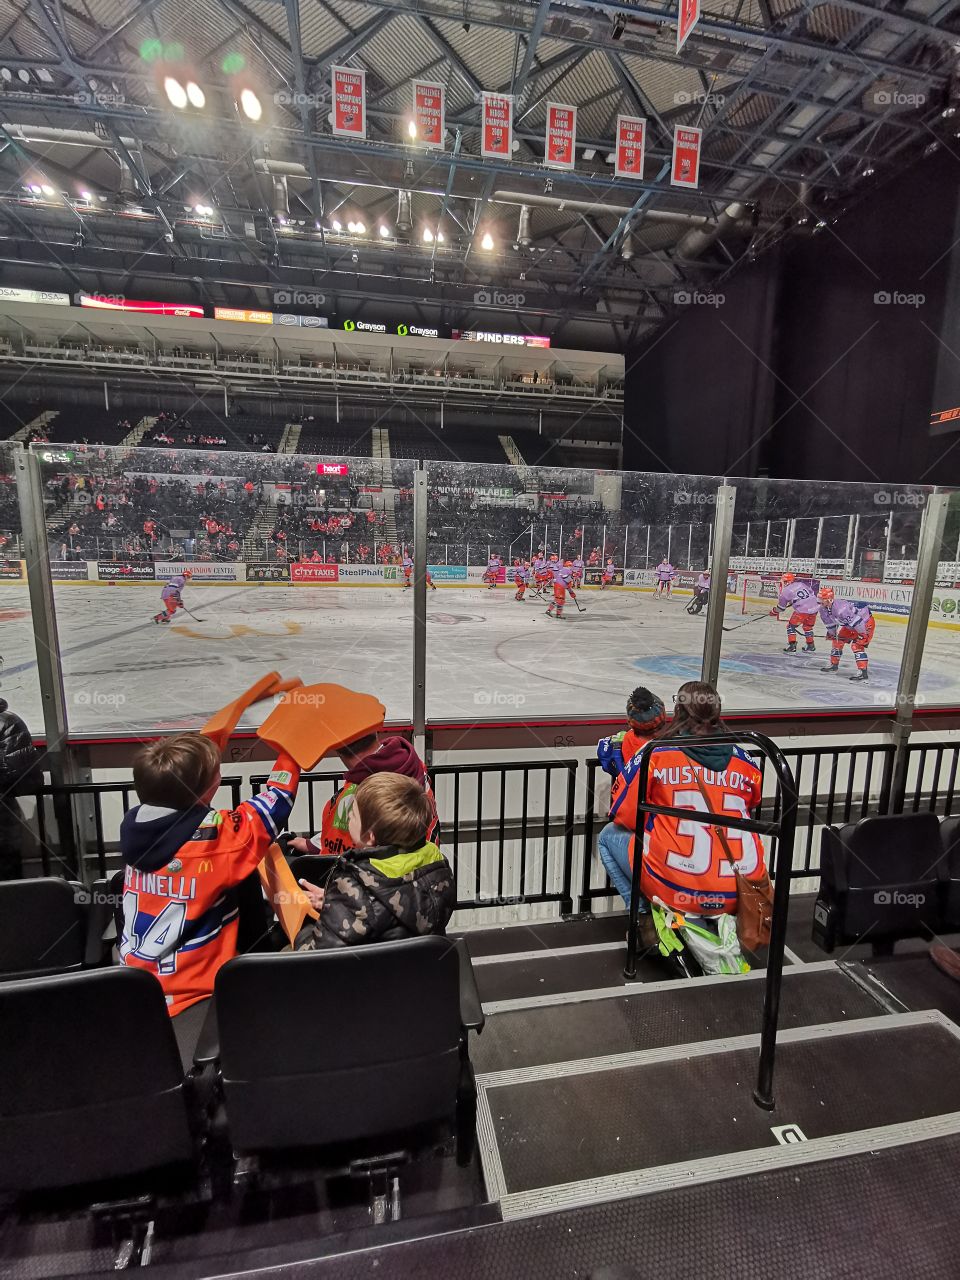 Love me a bit of ice hockey on a Sunday with the Sheffield Steelers, working on the shots so sorry if they are not perfect.